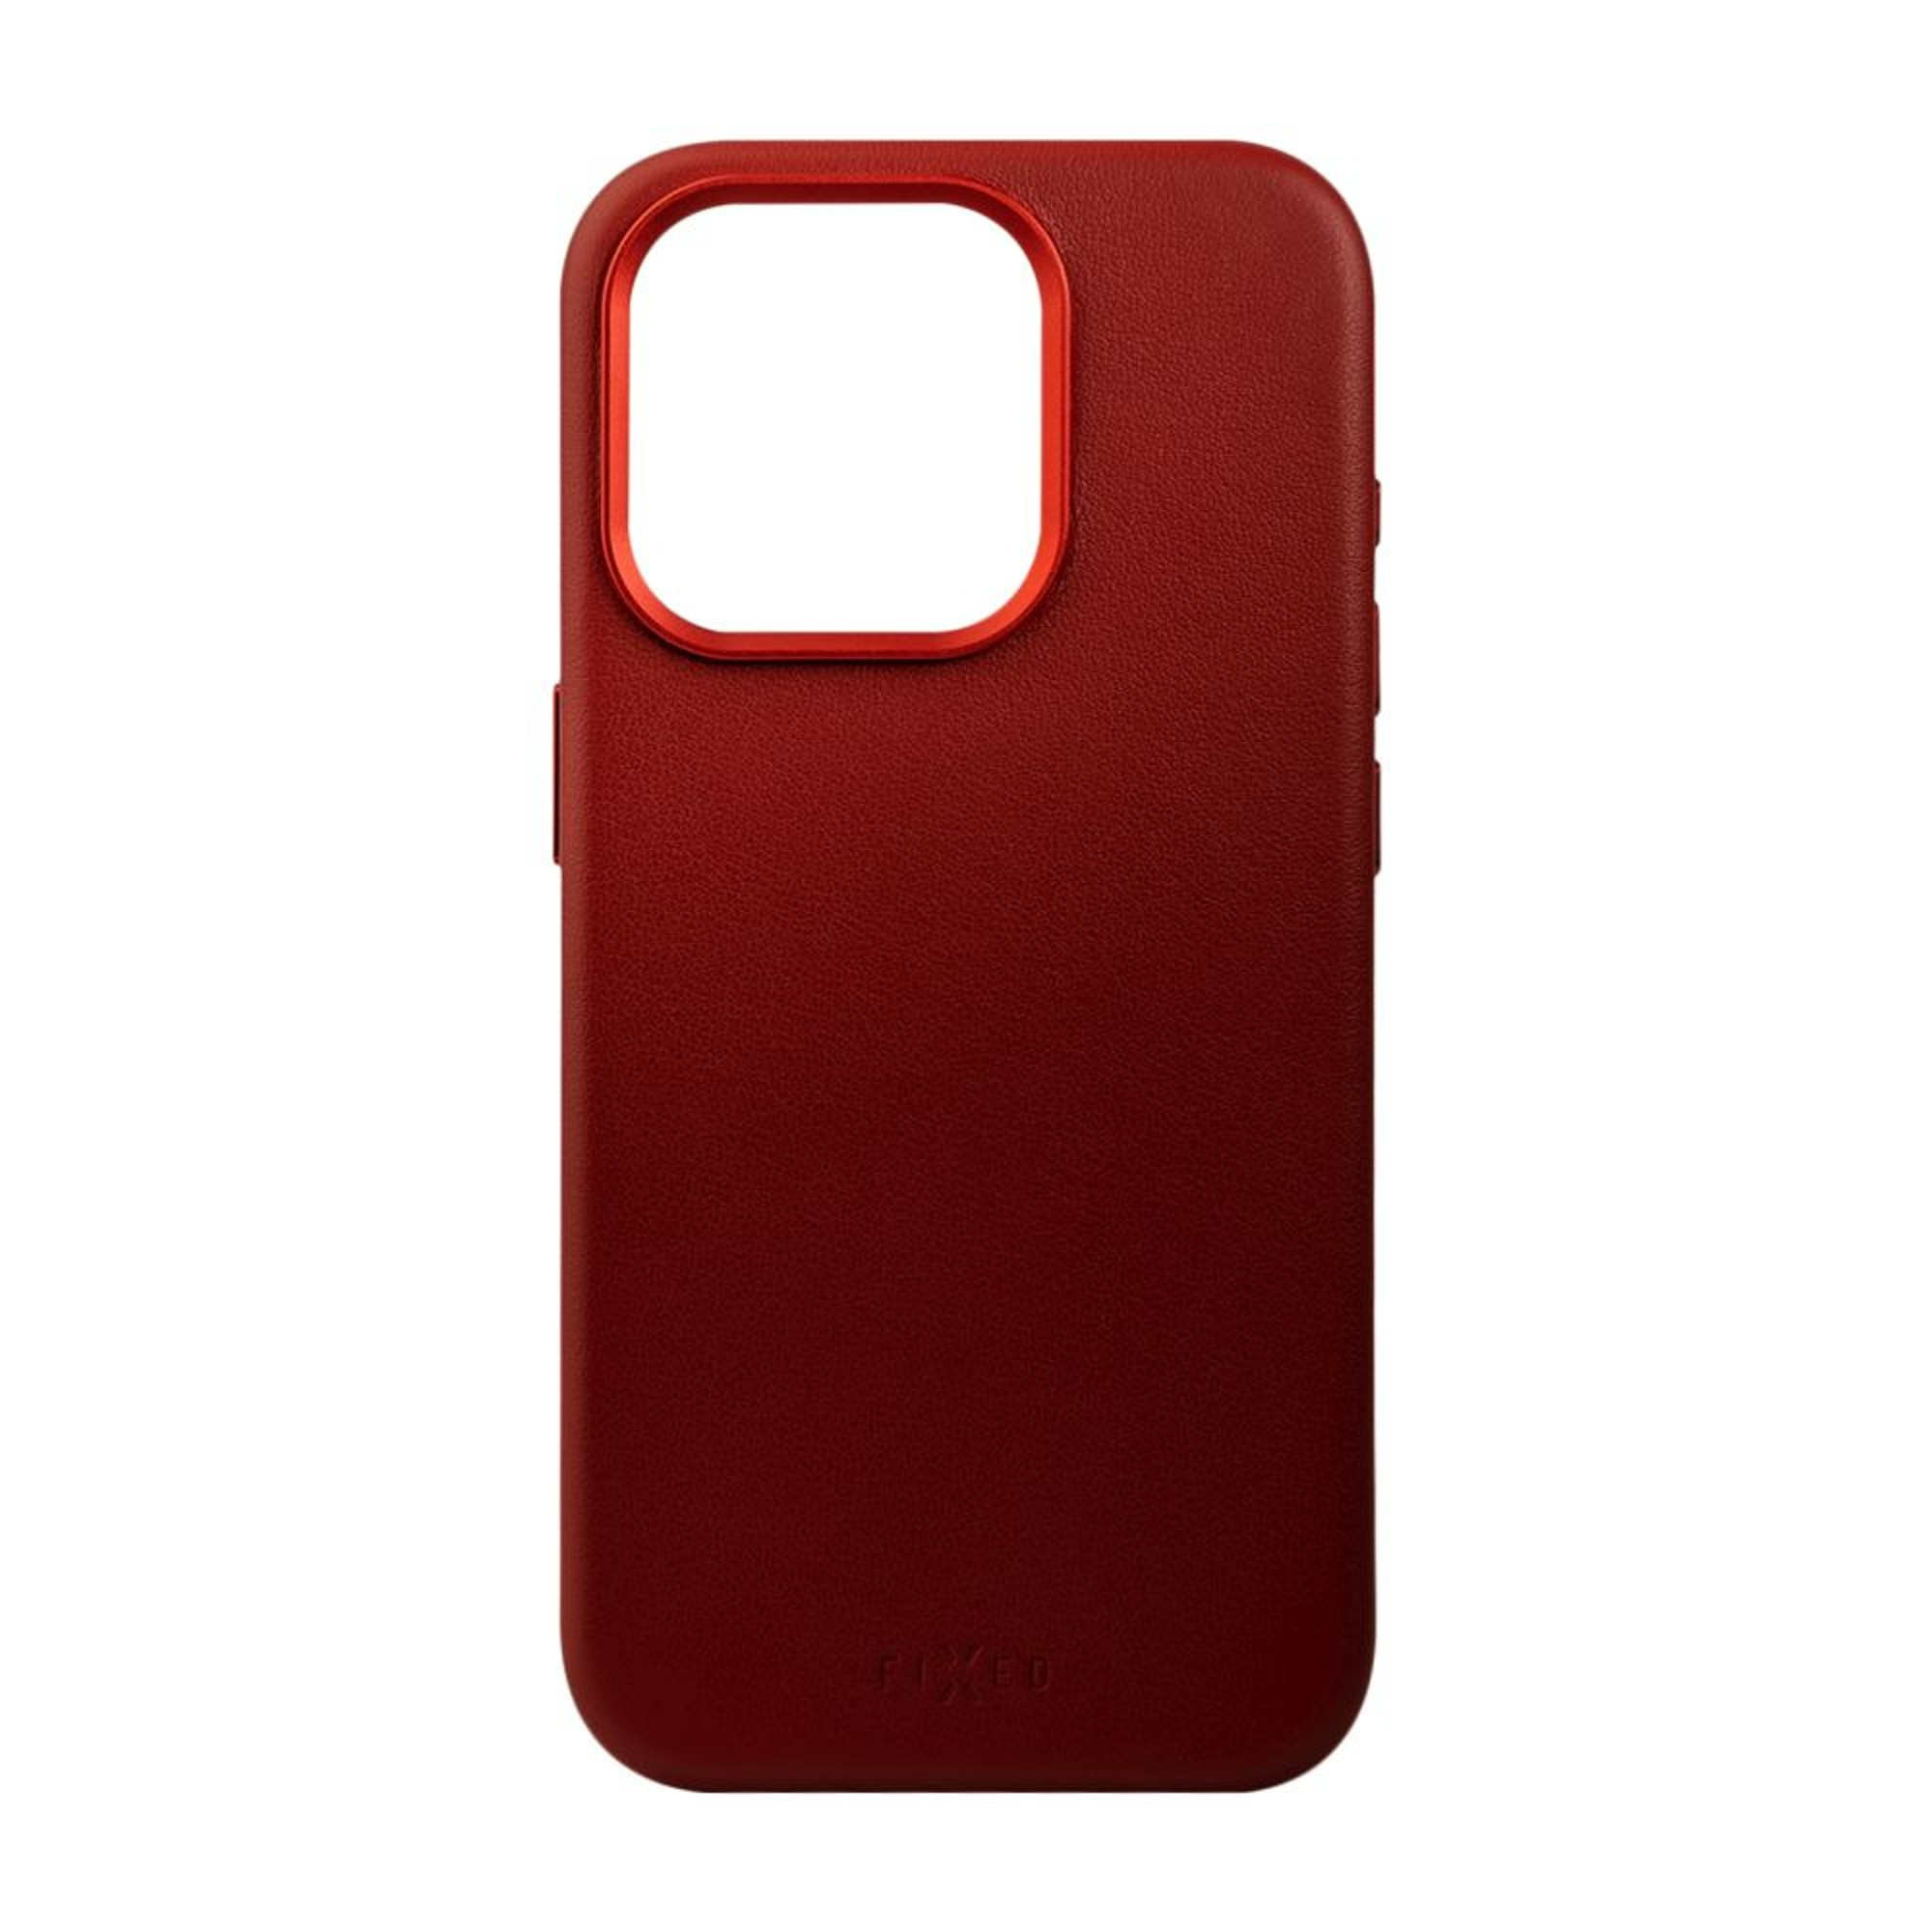 iPhone Pro, FIXED Apple, Backcover, MagLeather FIXLM-1202-RD, Rot 15